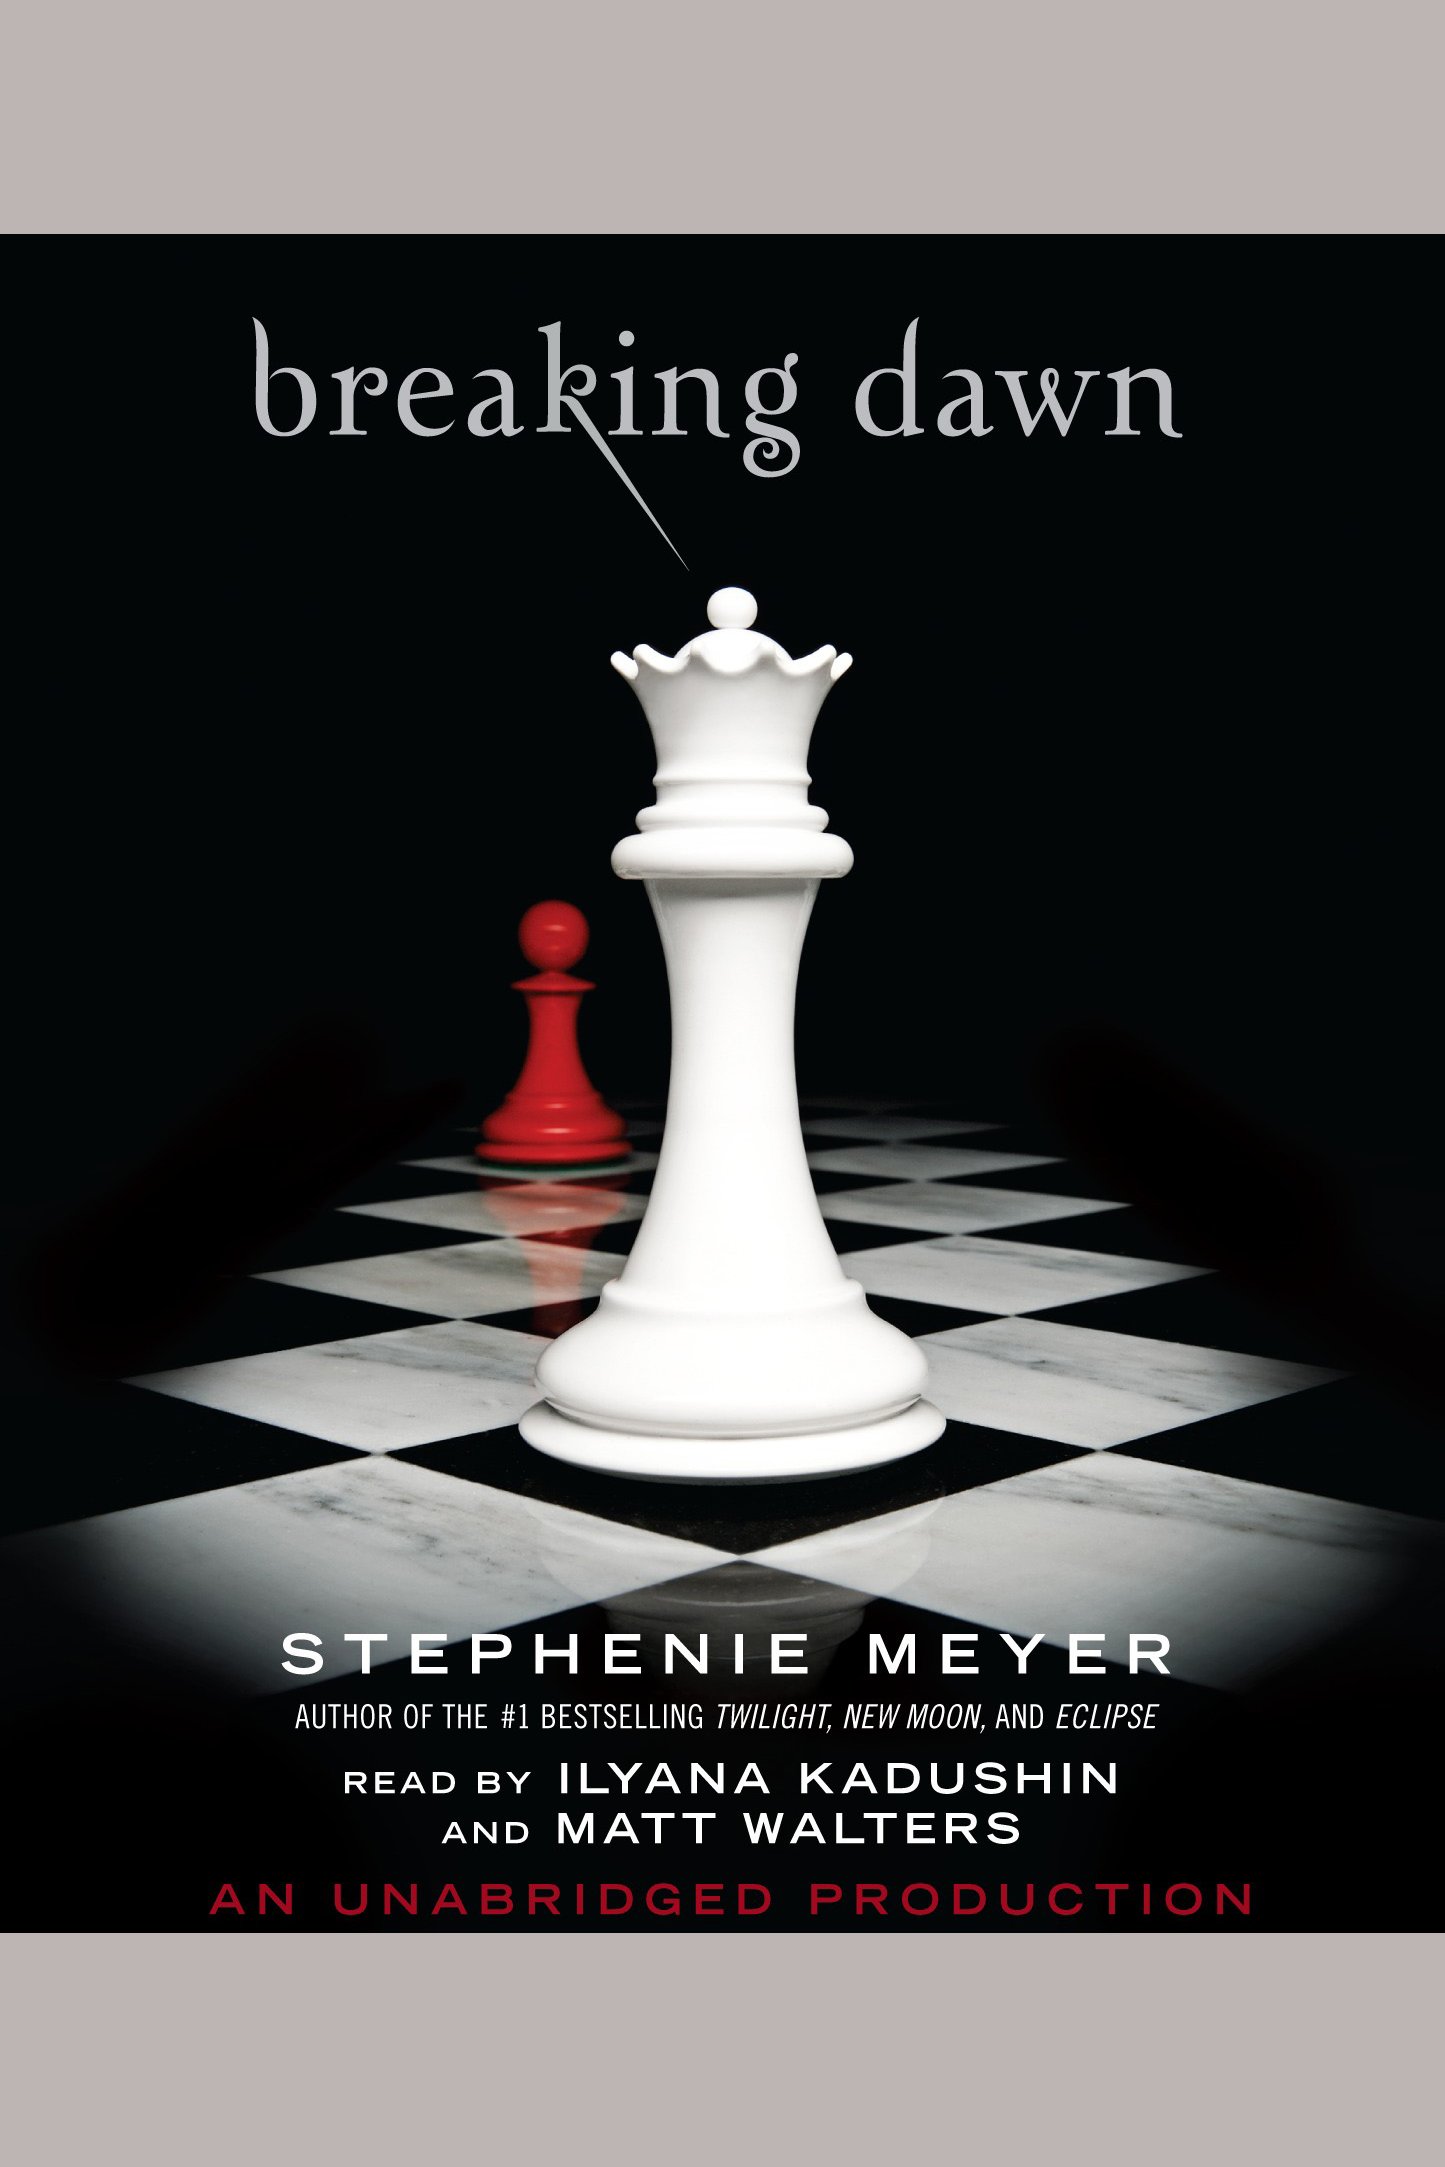 Breaking dawn cover image